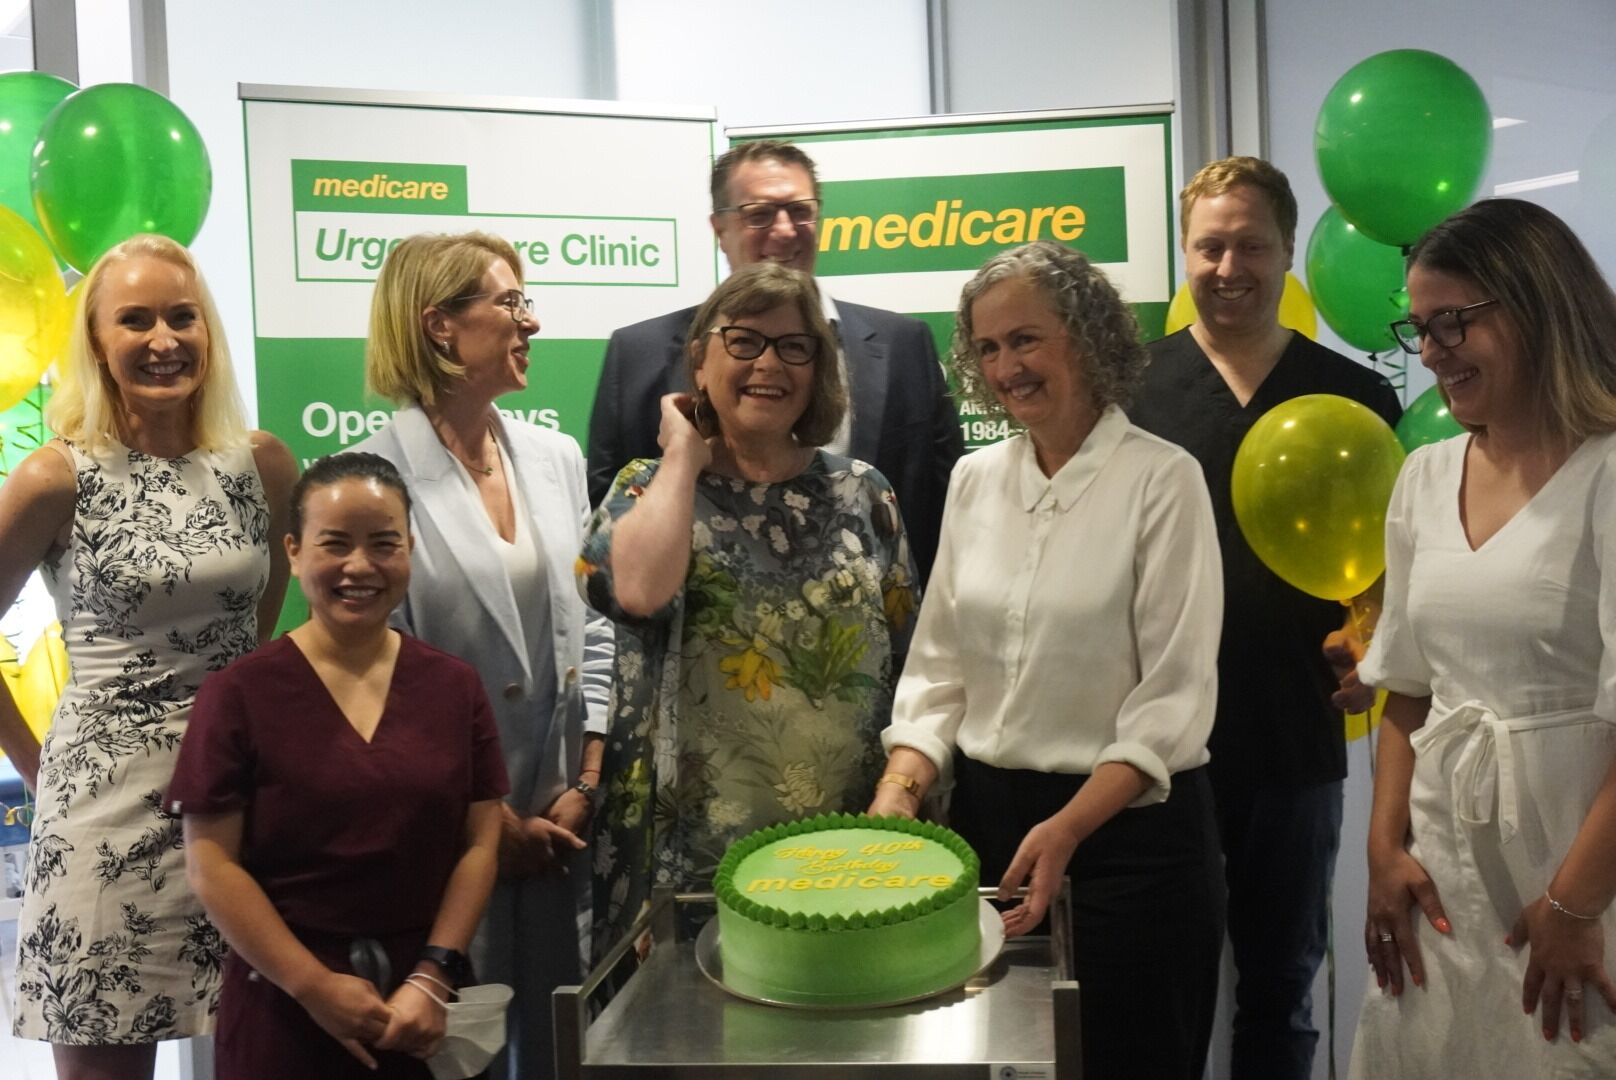 Opening Melbourne’s new Medicare Urgent Care Clinic Hero